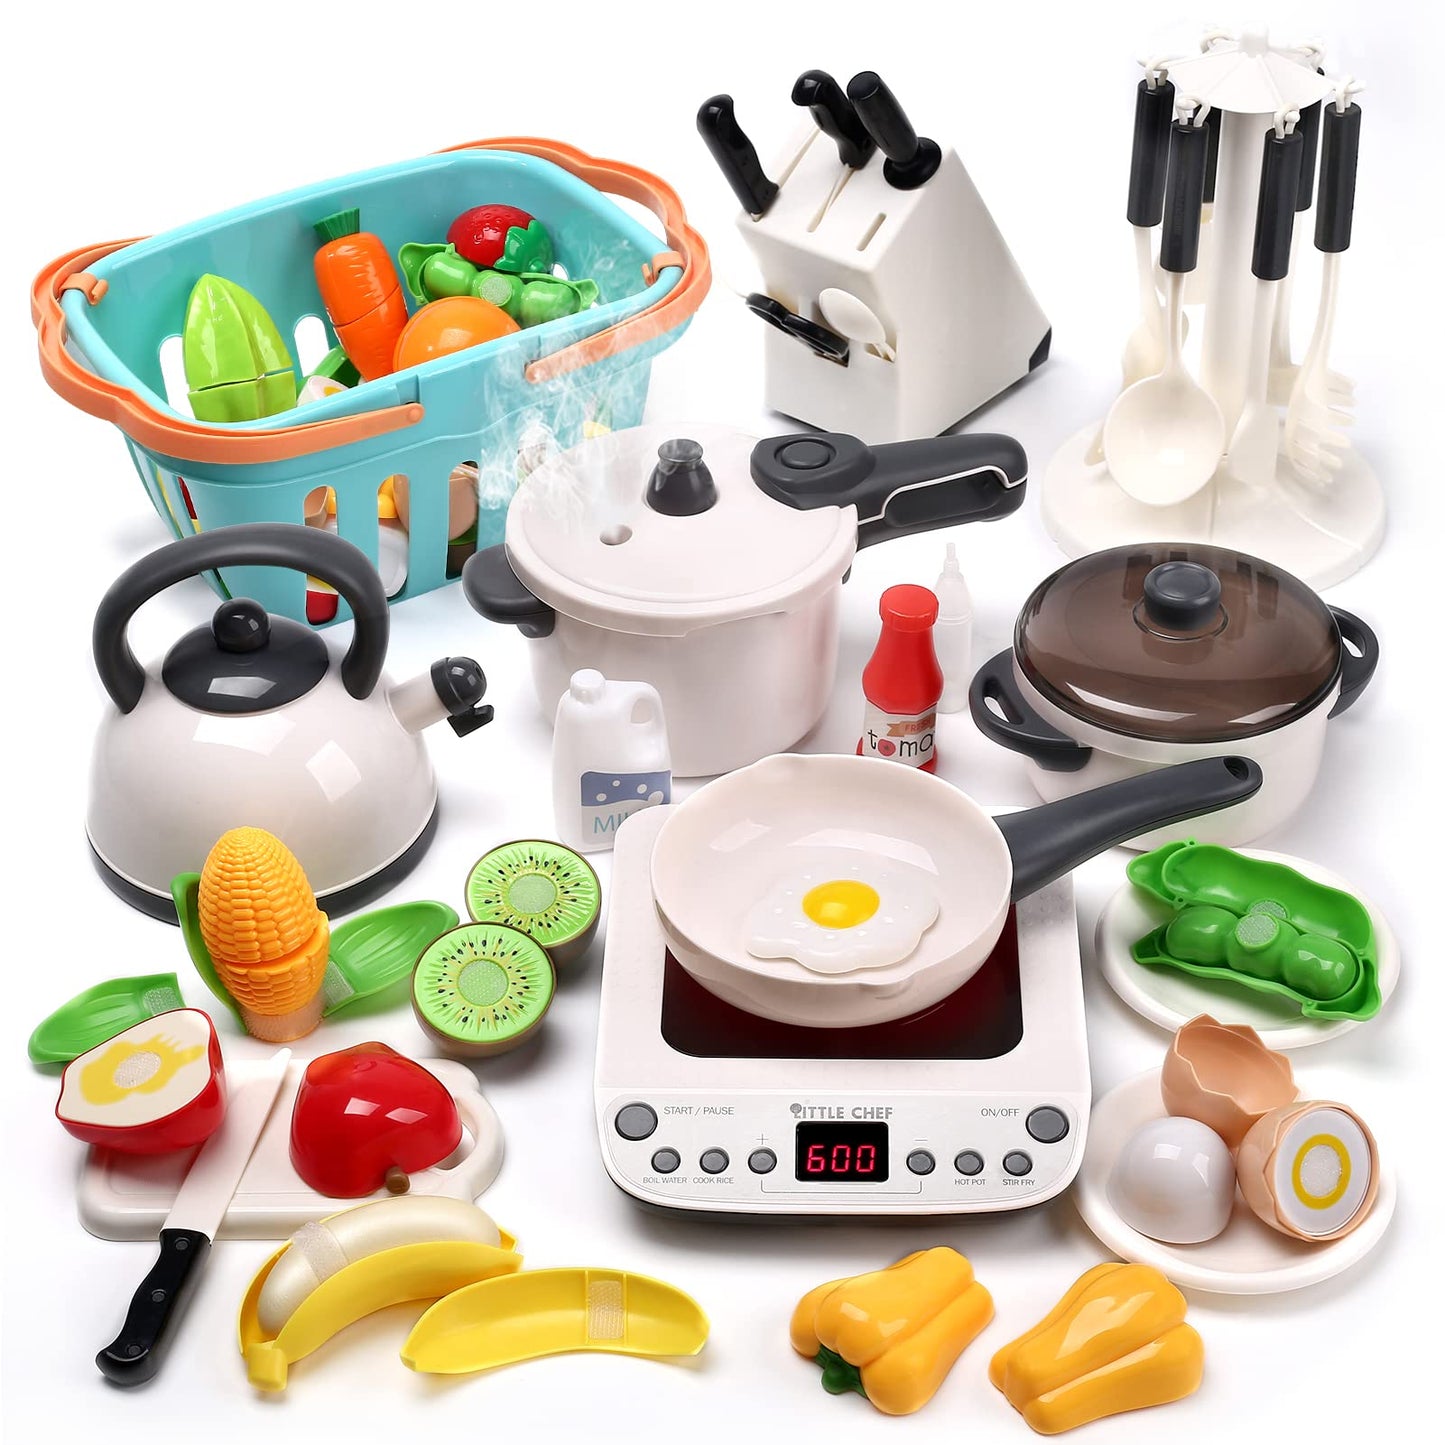 CUTE STONE Pretend Play Kitchen Toy with Cookware Steam Pressure Pot, Electronic Induction Cooktop, Cooking Accessories